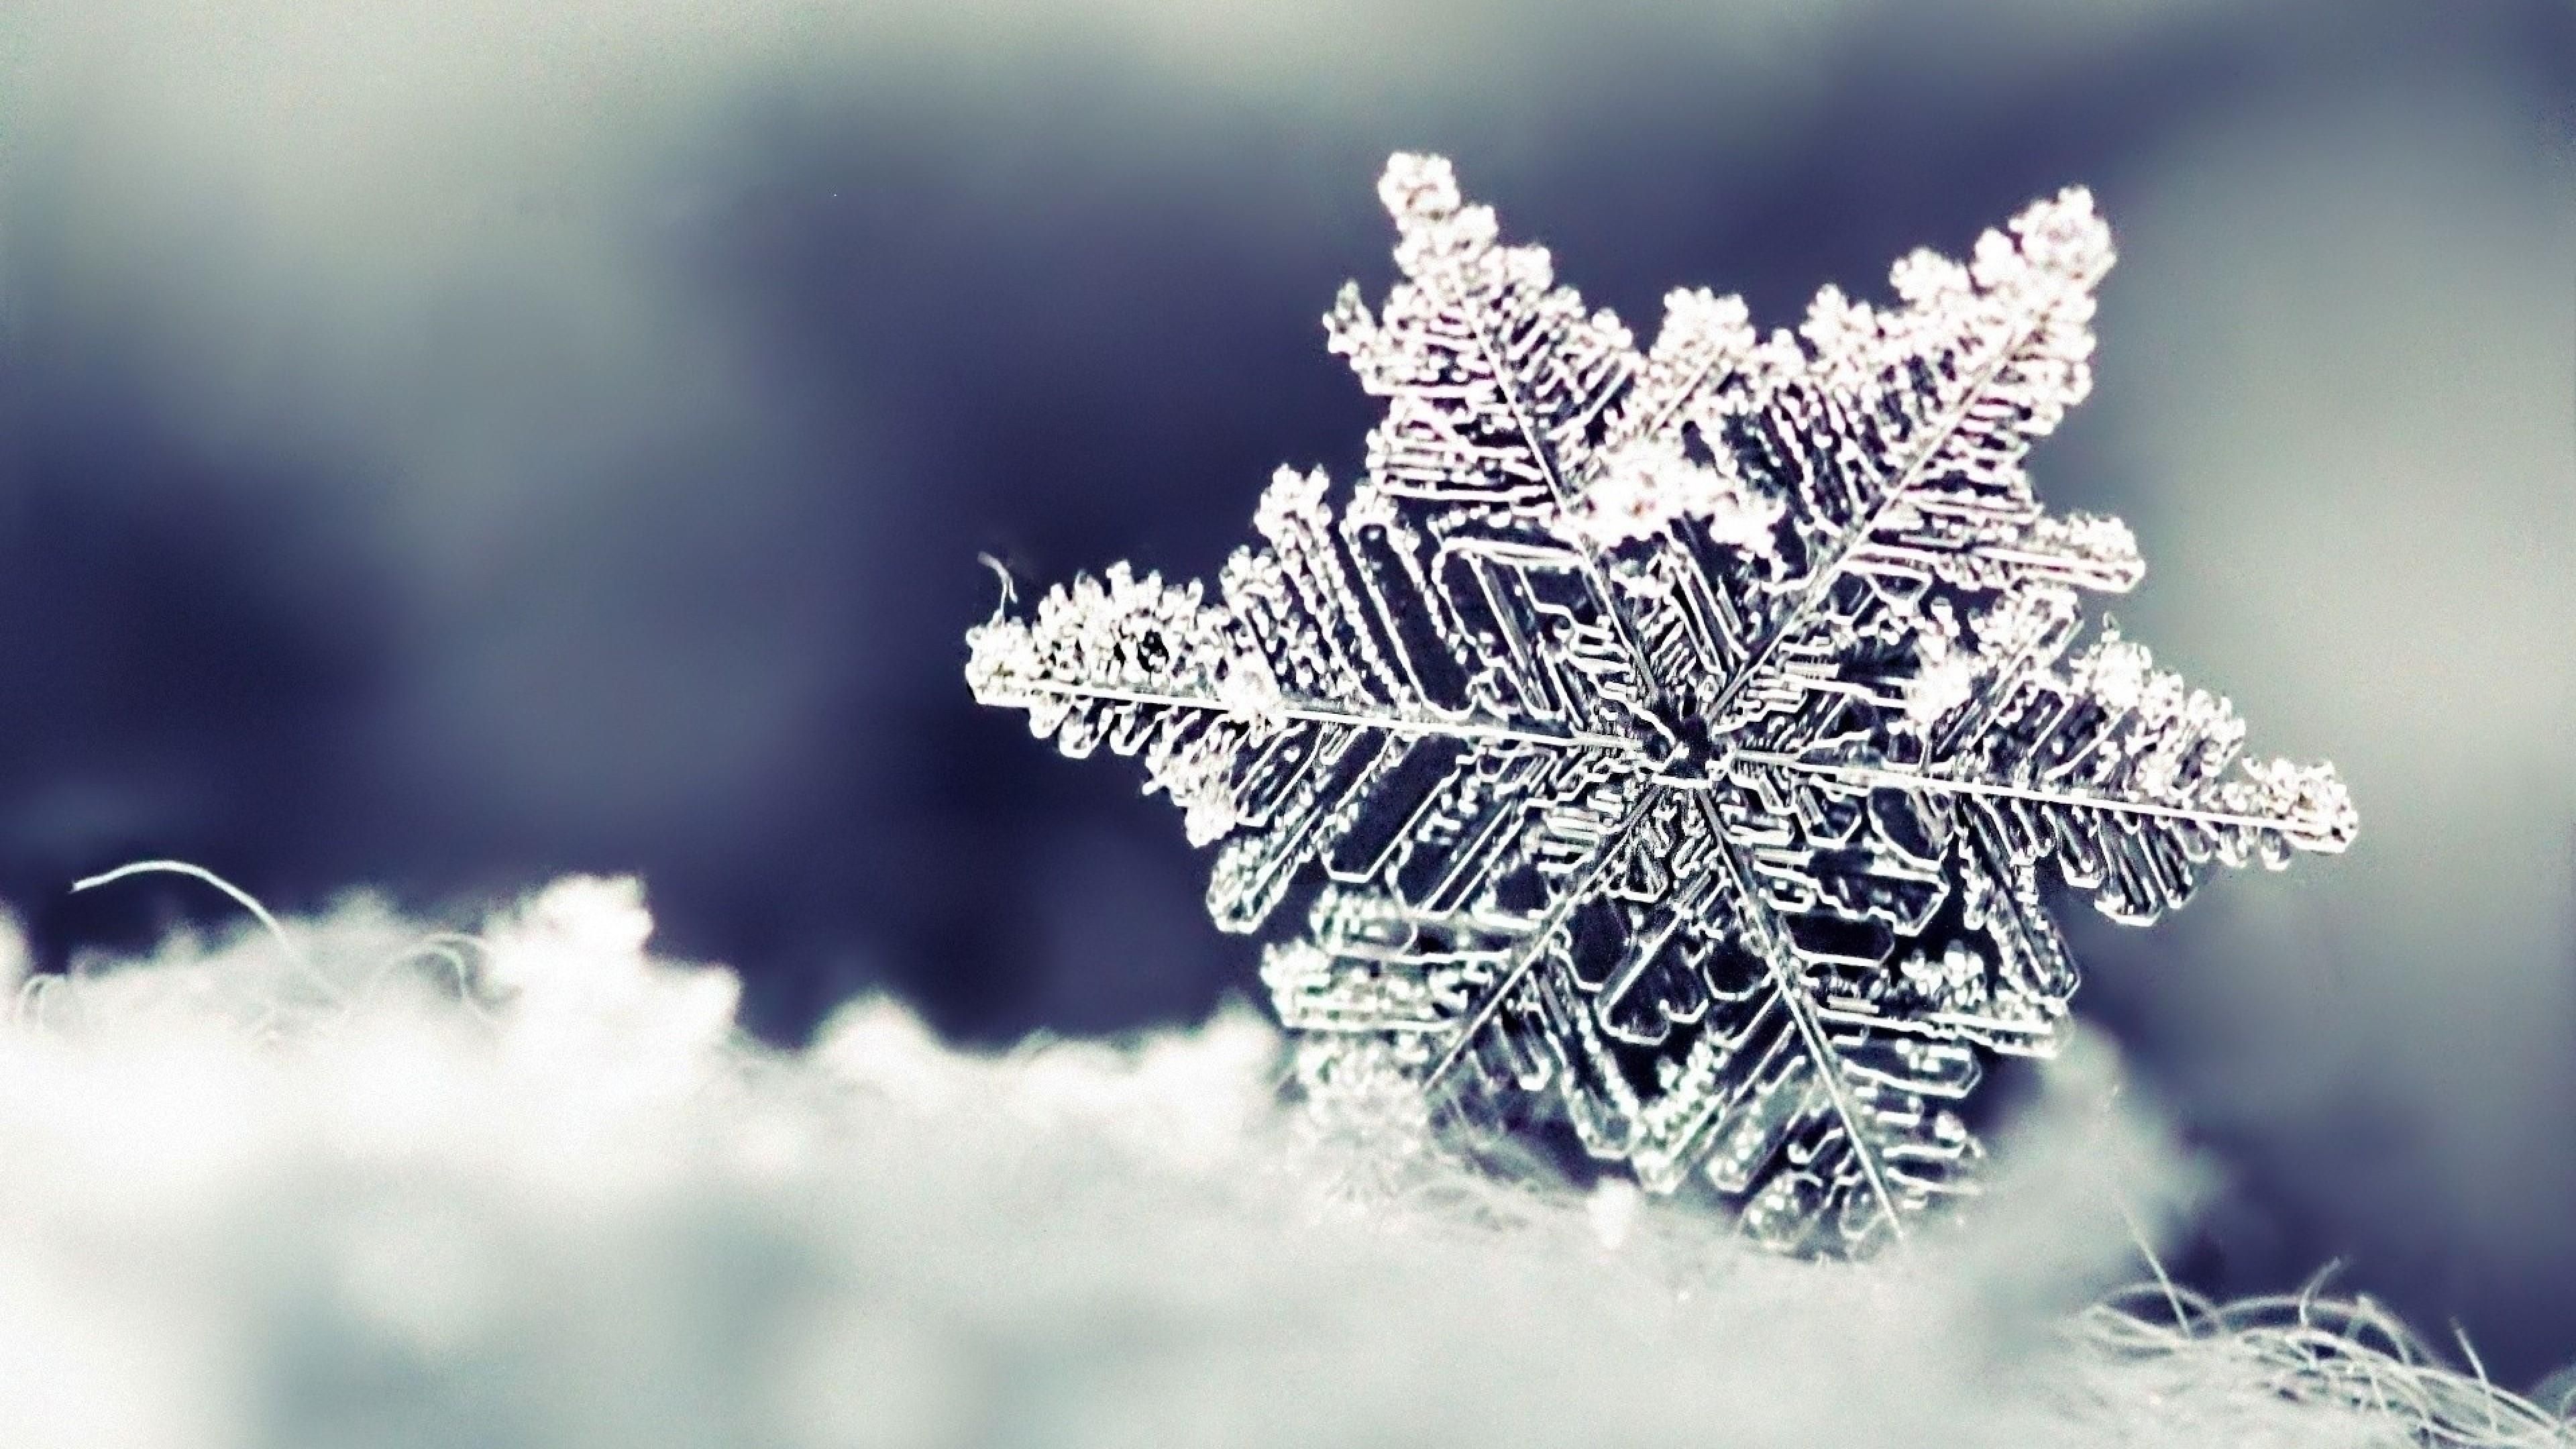 Snowflake Collection See All #Wallpaper, #wallpaper #background #nature. Nature background iphone, Winter wallpaper, Good morning winter image